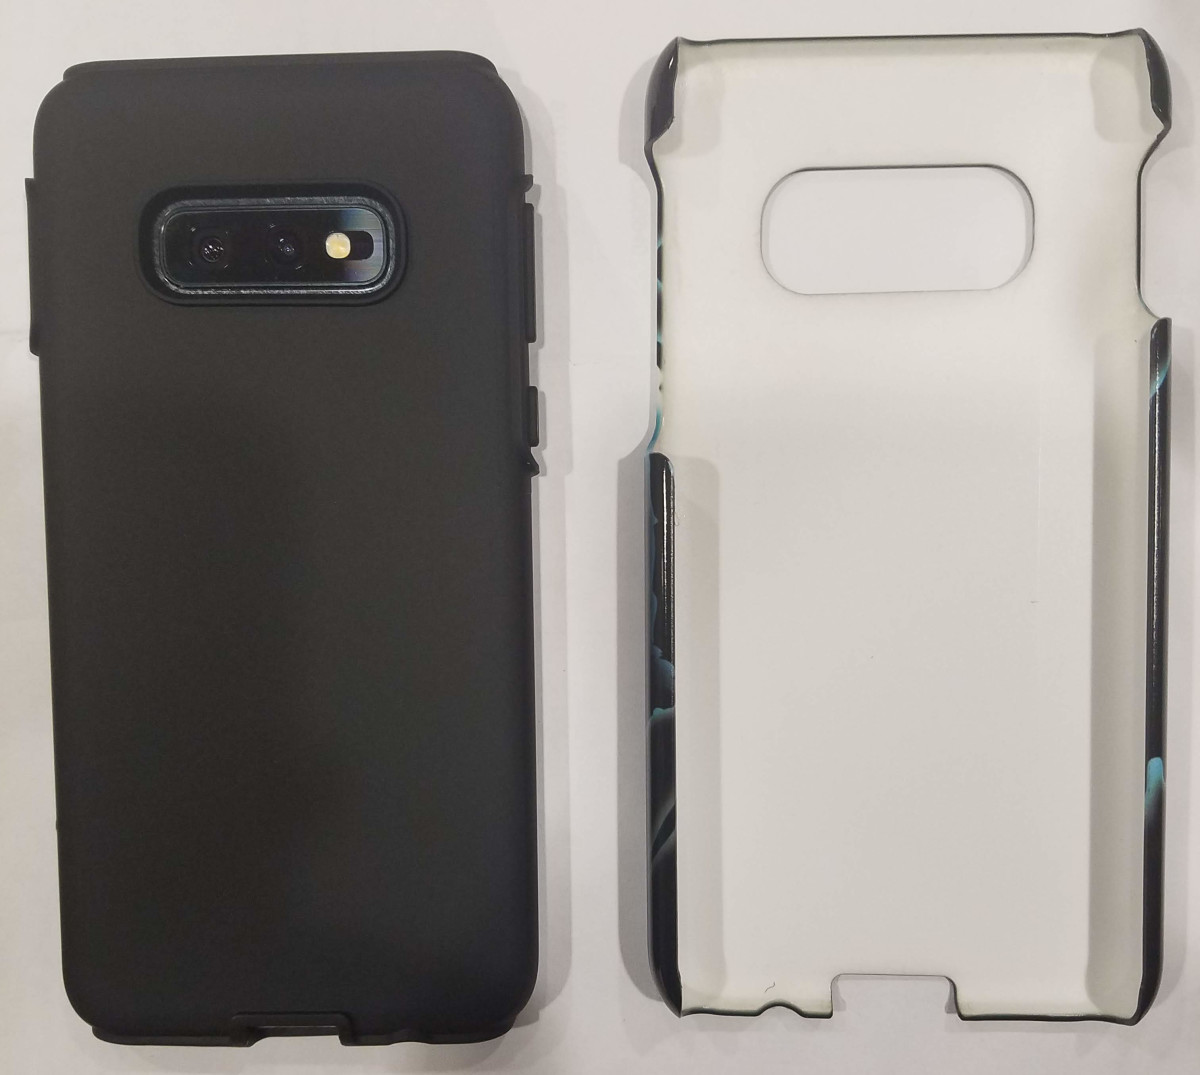 Redbubble Tough phone cases have a tough rubbery inner piece and a snap-on outer piece